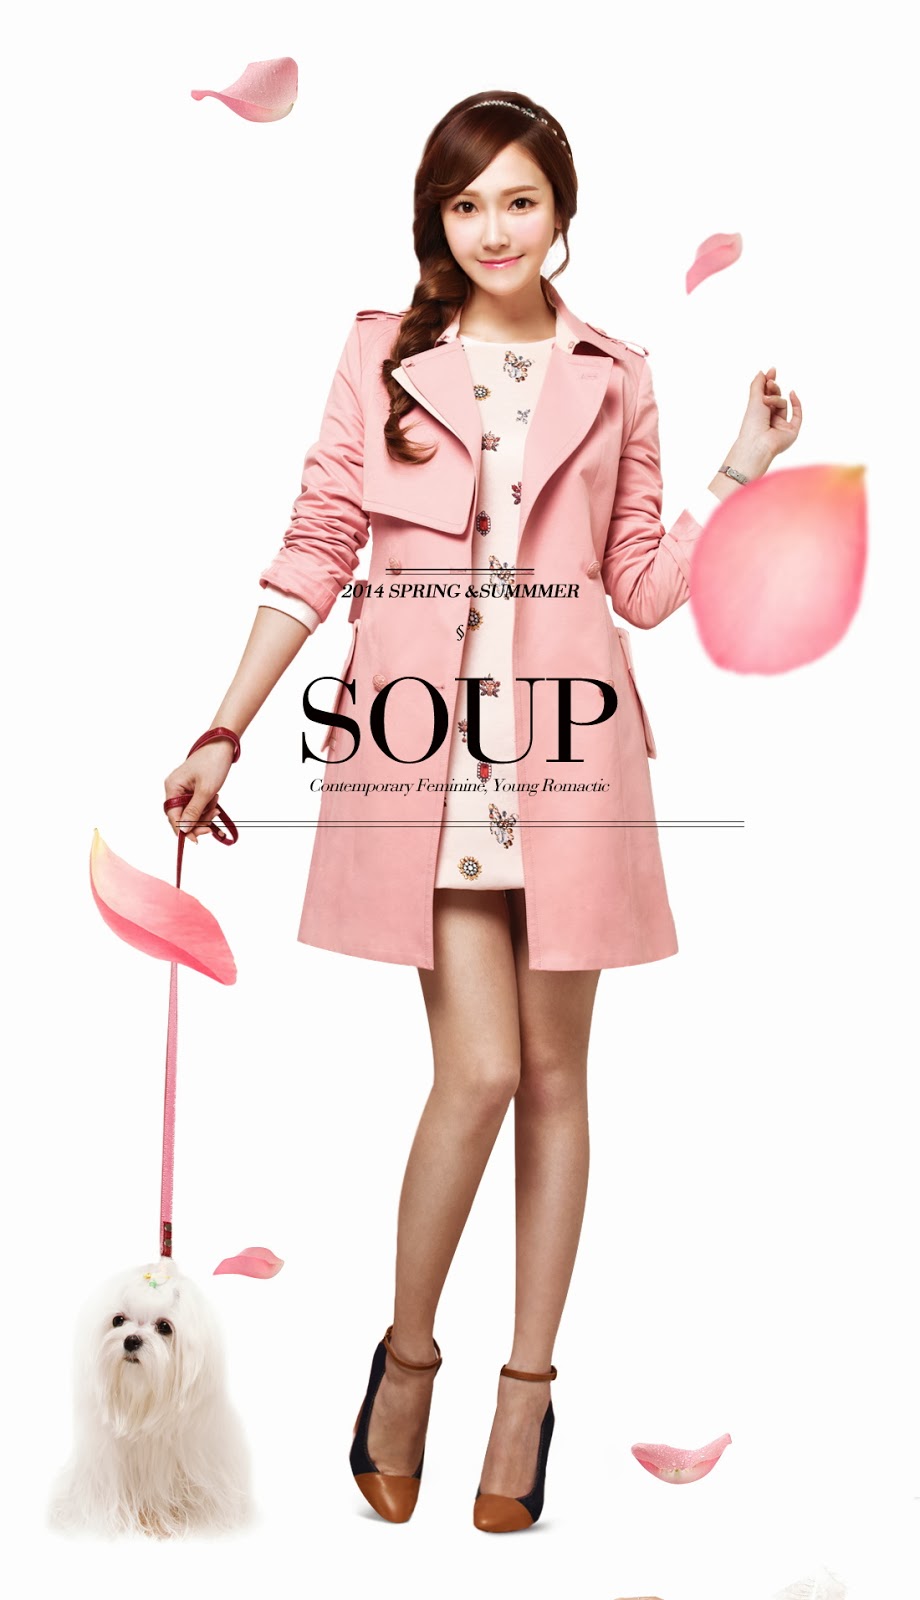 Soshi95: Jessica SOUP Fashion Promotion Pictures 070214